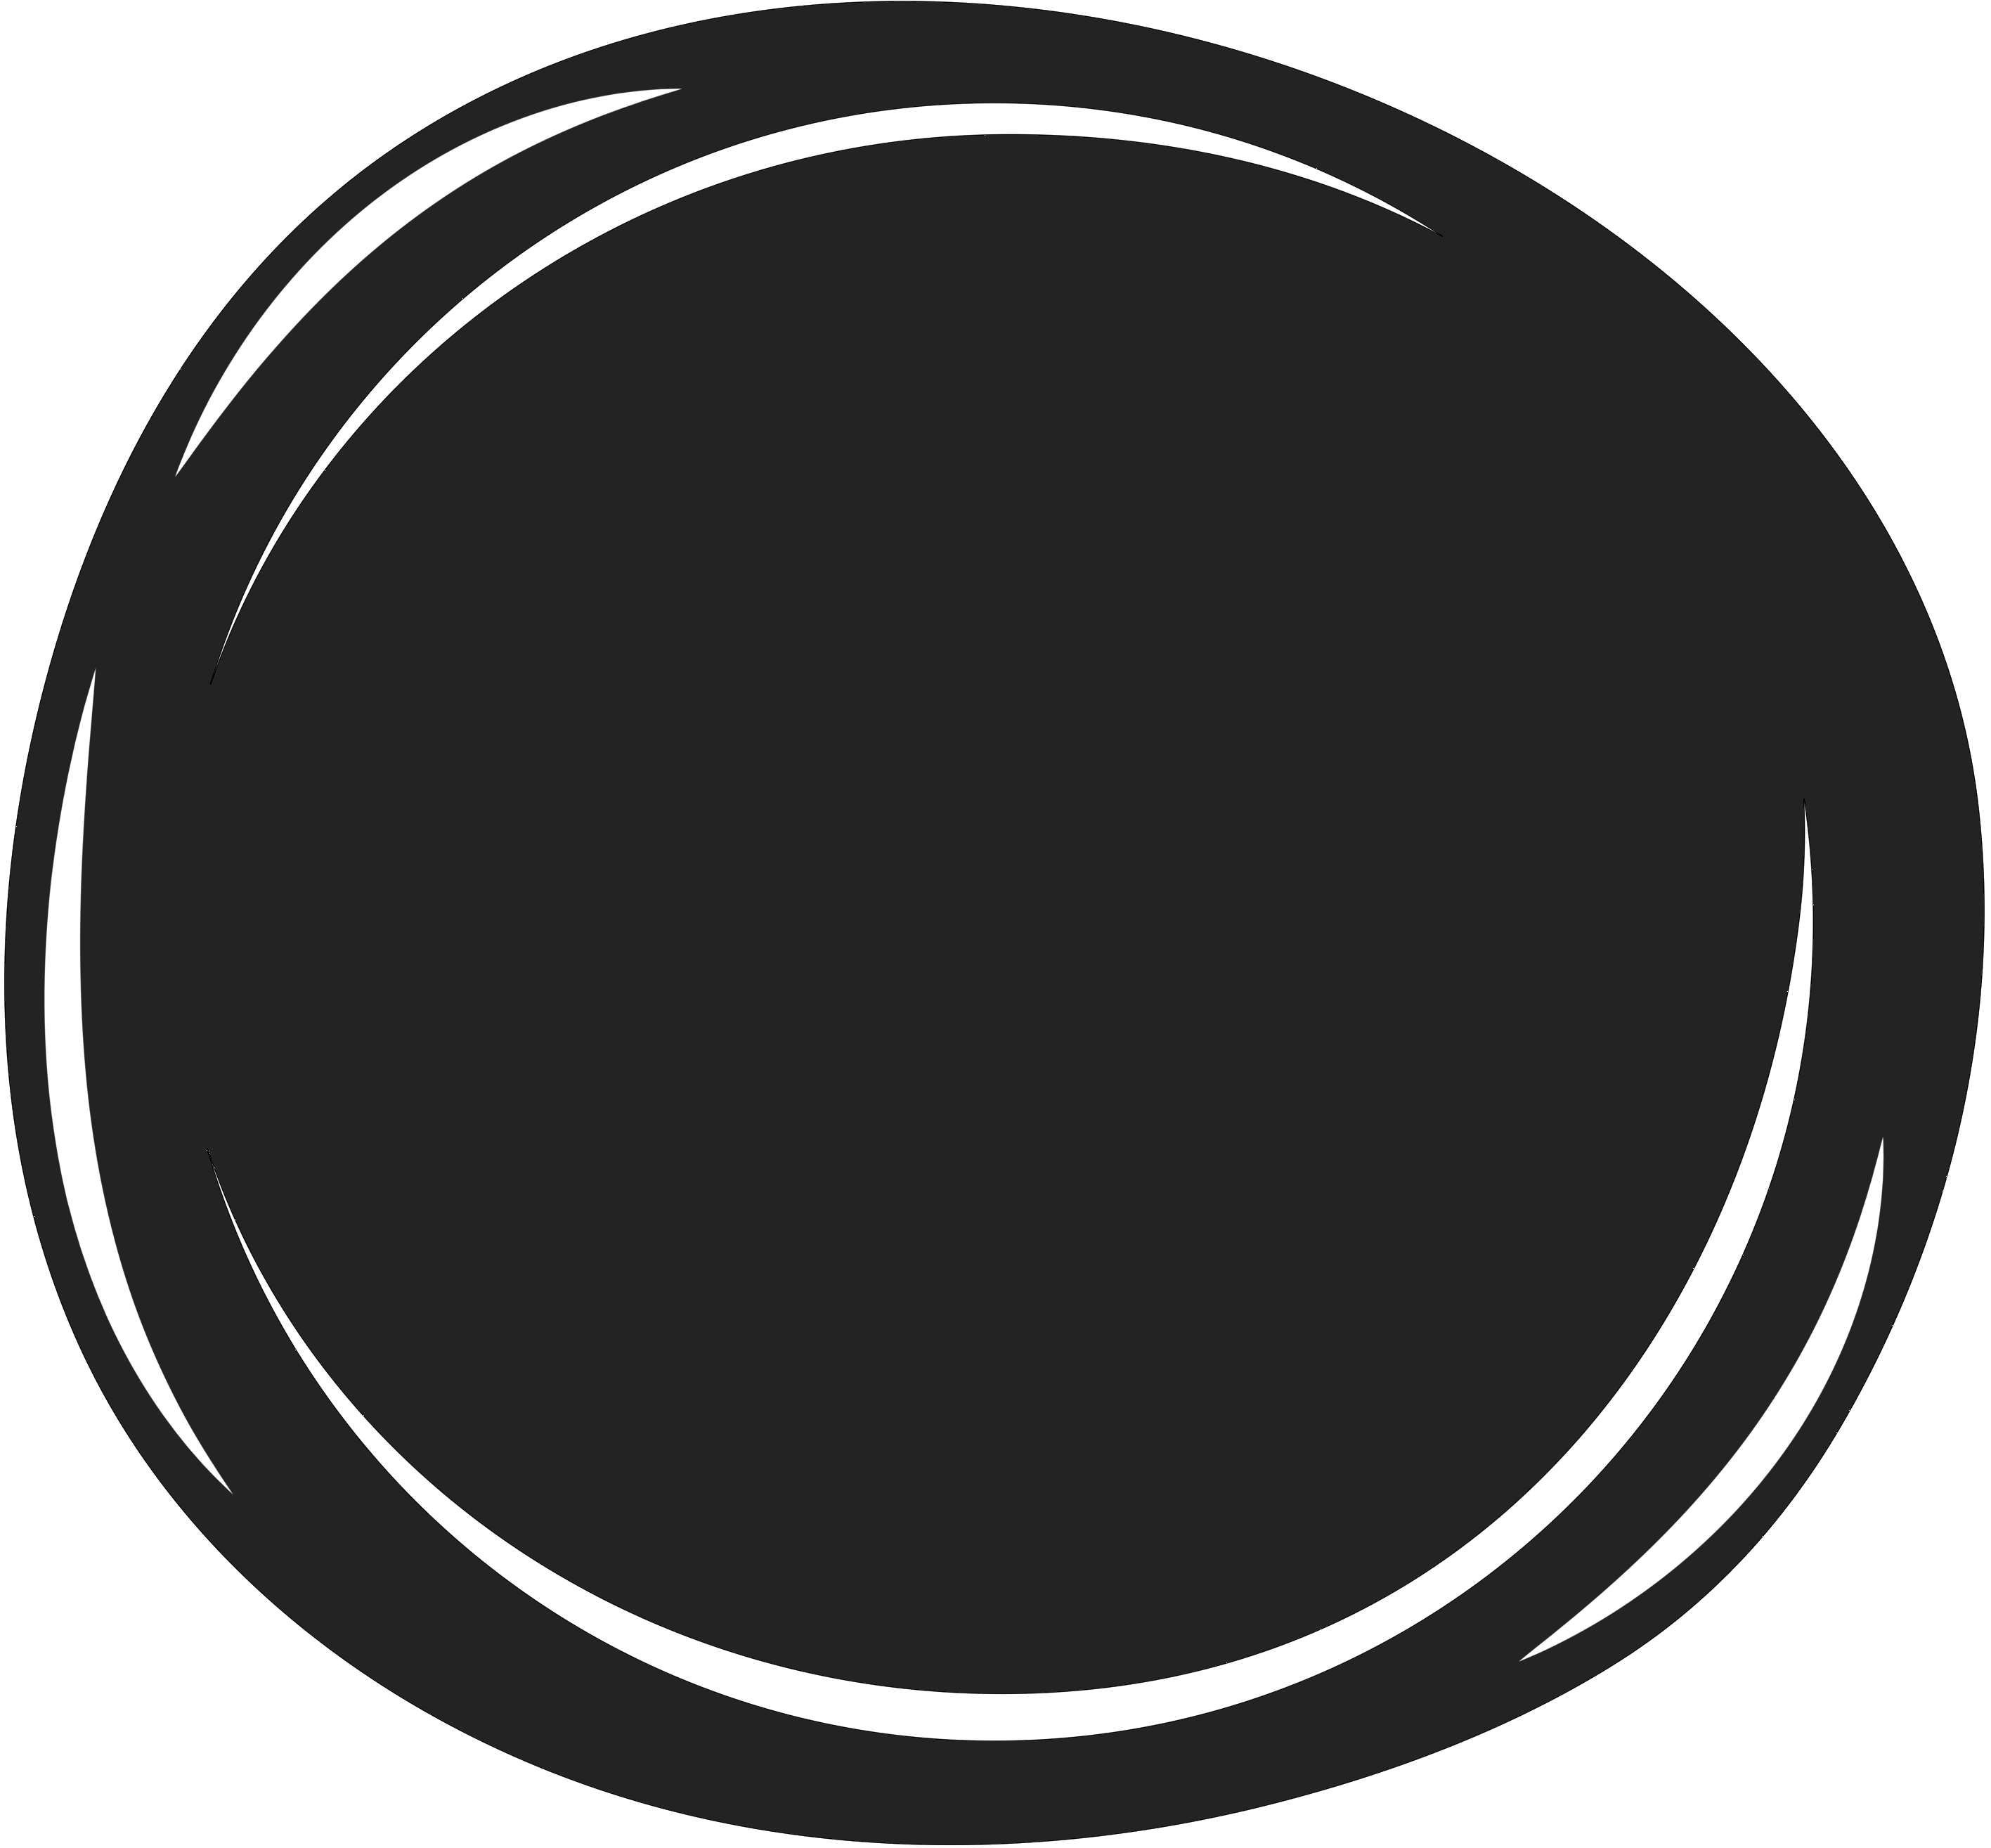 Black Circle Background For Logo Pic Nugget